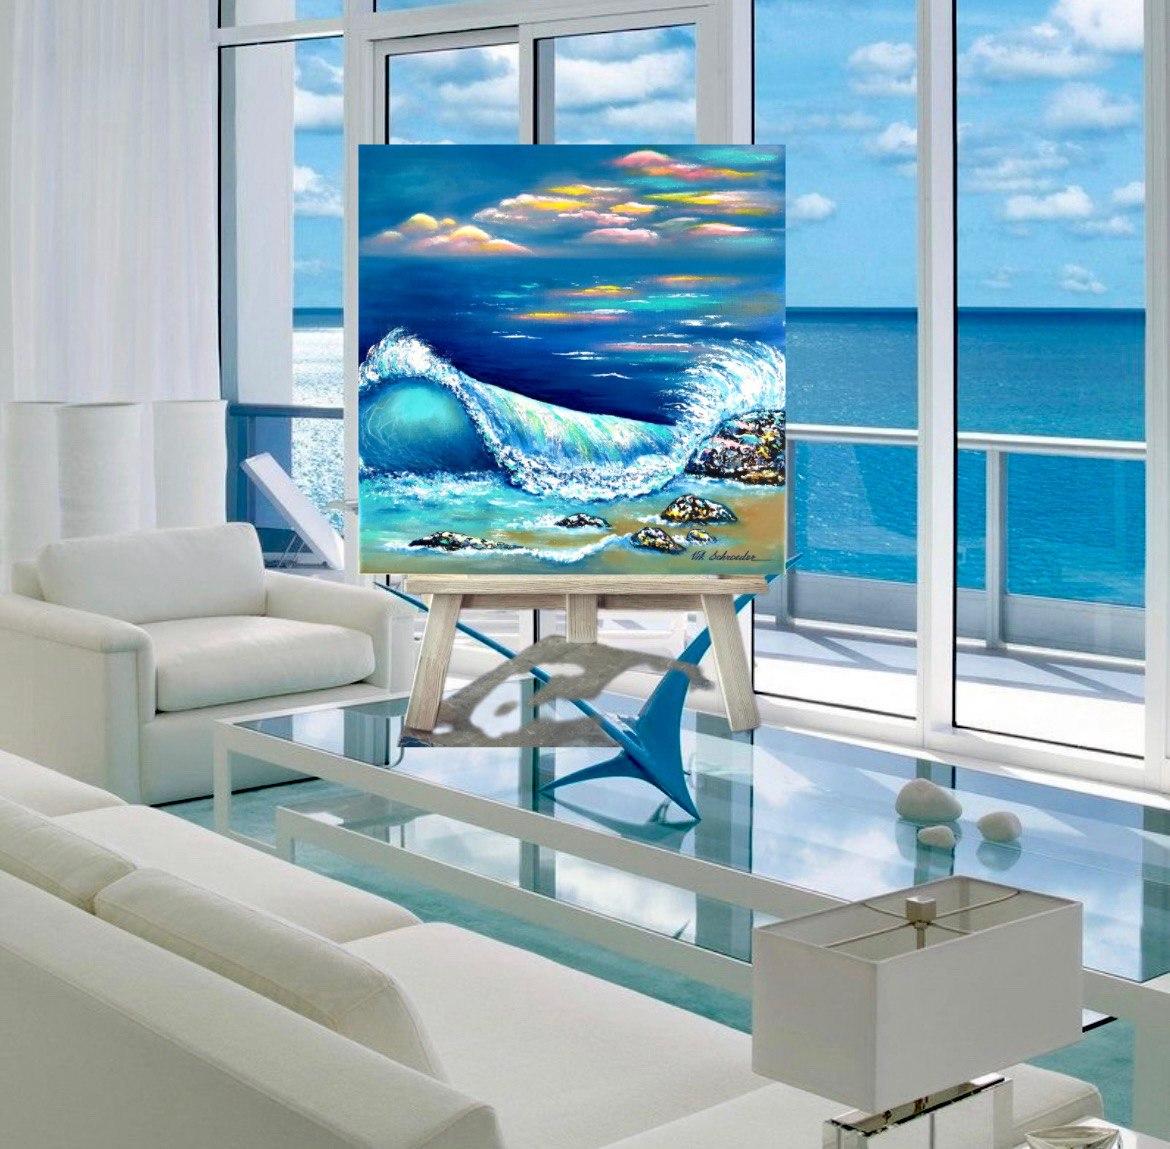 When the sea merges with the sky. Impressionism oil painting / wave / Gift Art. - Painting by Vik Schroeder 